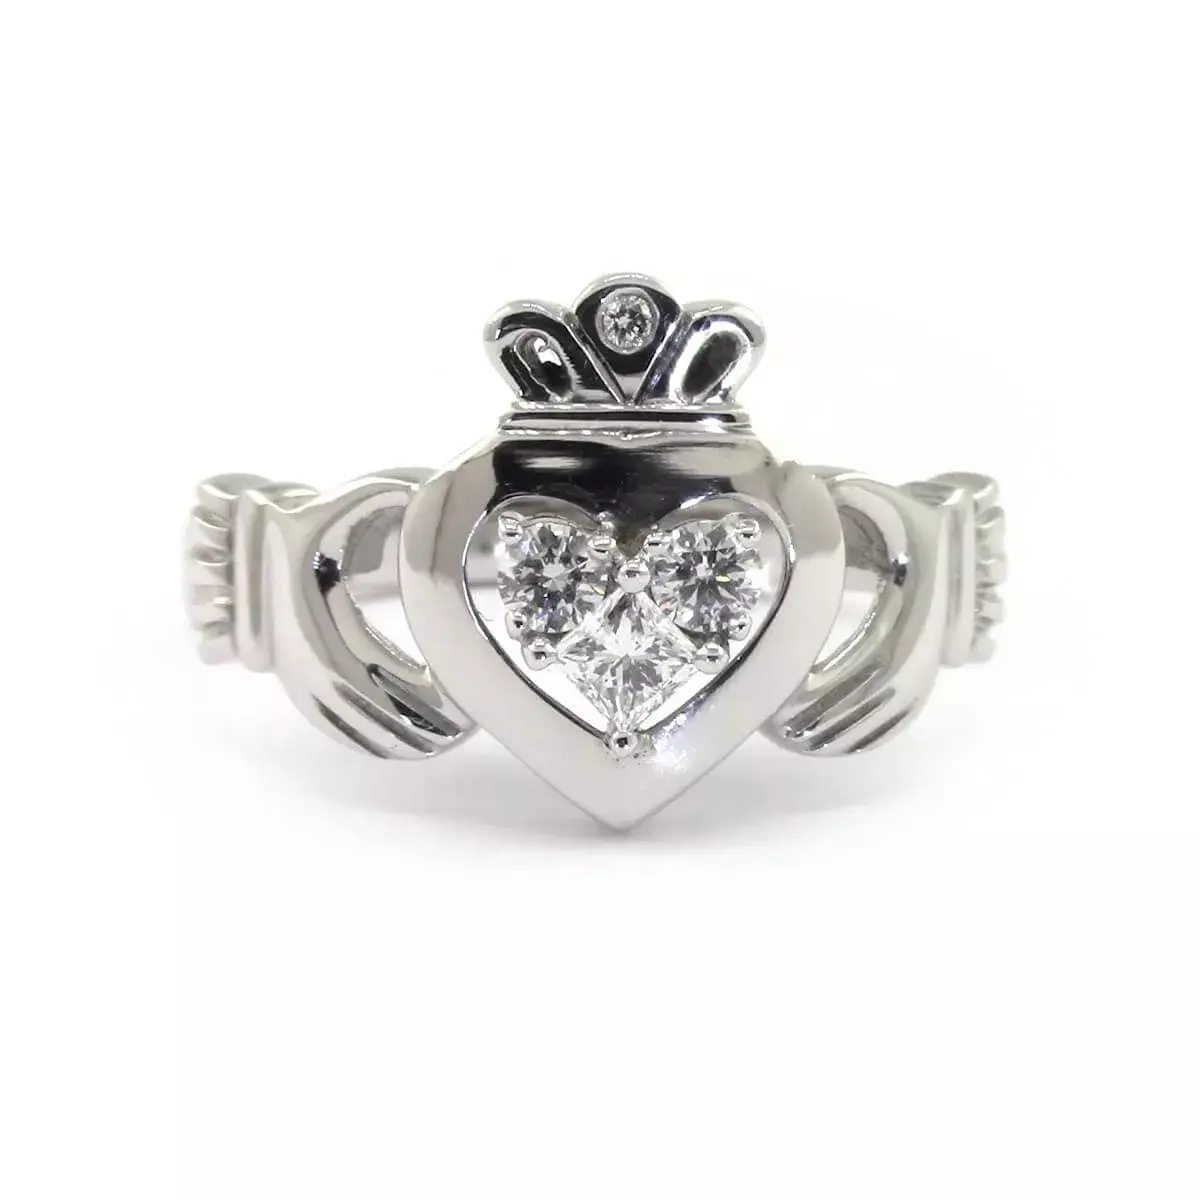 Claddagh Ring With Princess Cut and Brilliant Cut Diamonds...